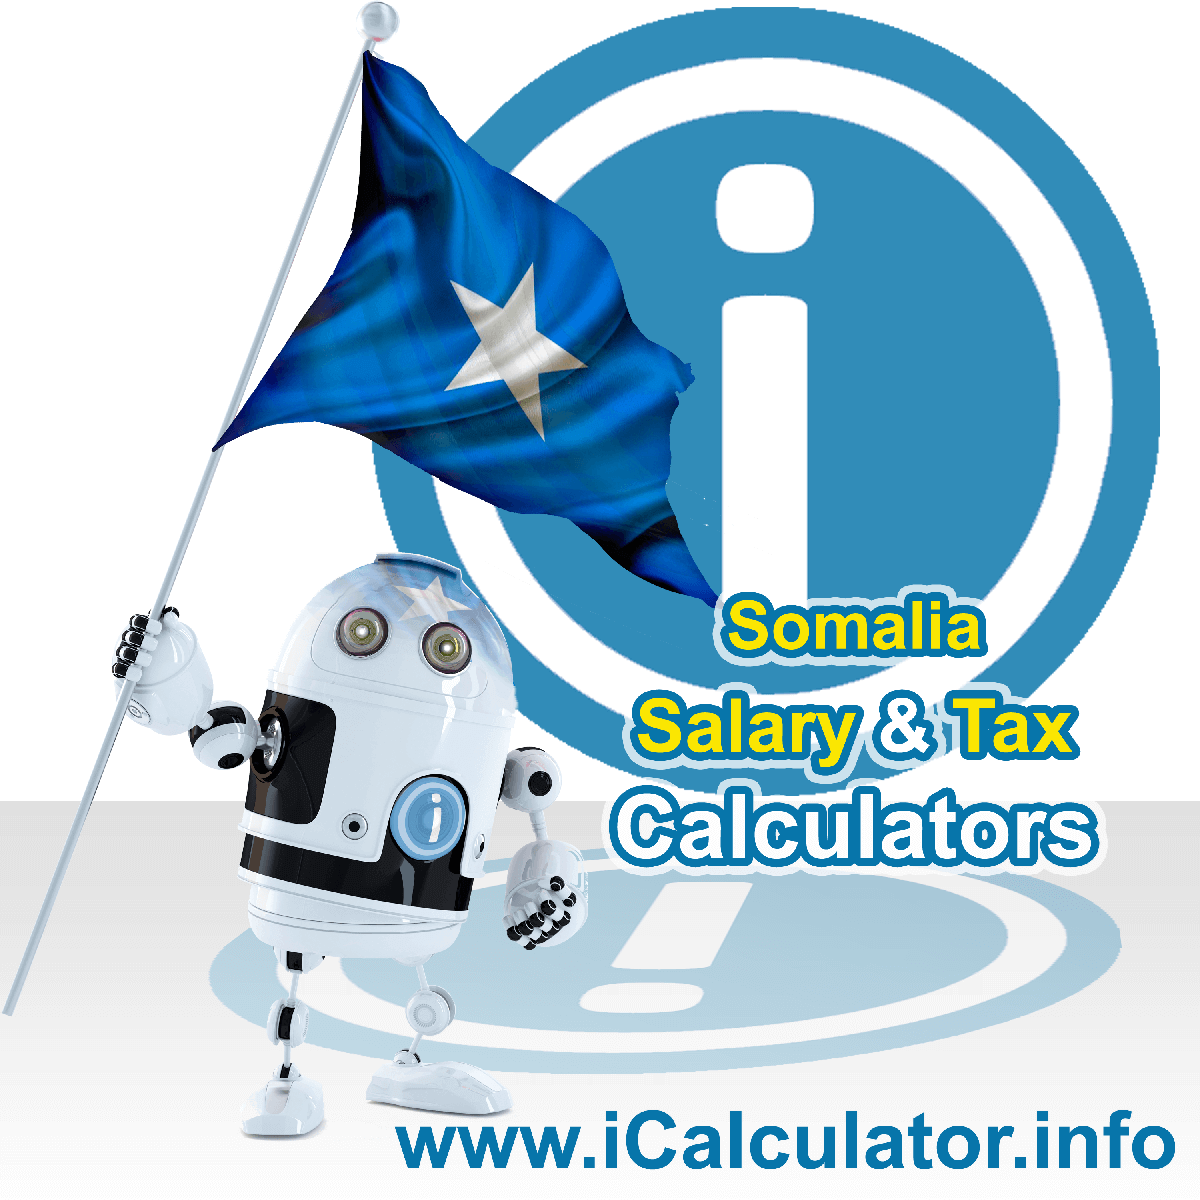 Somalia Tax Calculator. This image shows the Somalia flag and information relating to the tax formula for the Somalia Salary Calculator